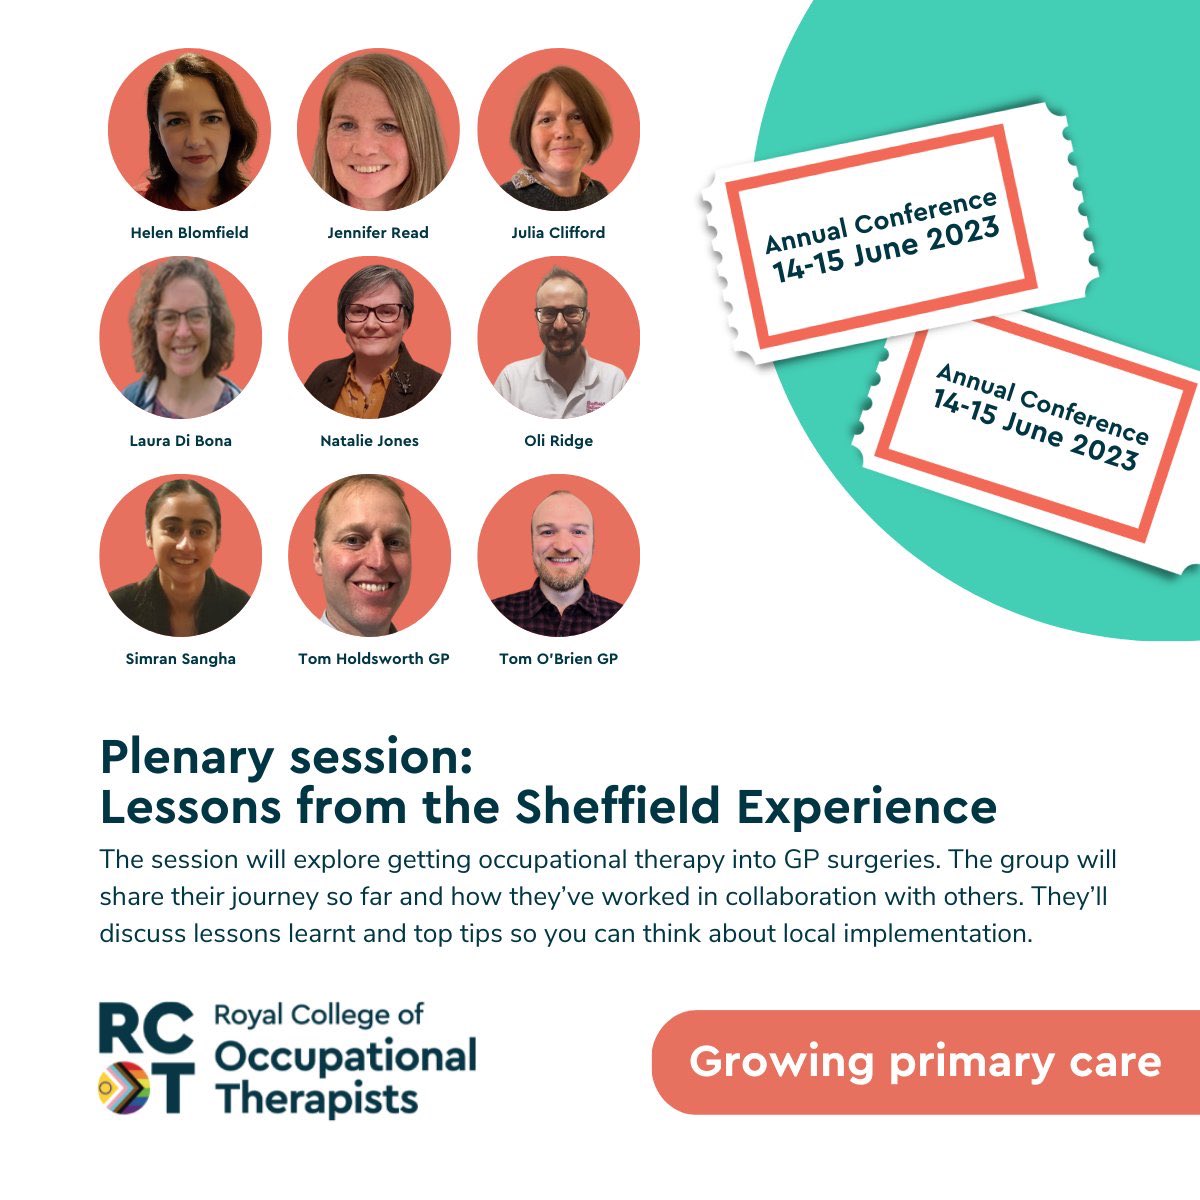 OTs and other AHPs are making the difference in GP surgeries throughout Wales the rest UK. Looking forward to hearing about work in primary care in Sheffield with frail and older people. 💚 #RCOT2023 @SheffOTCA